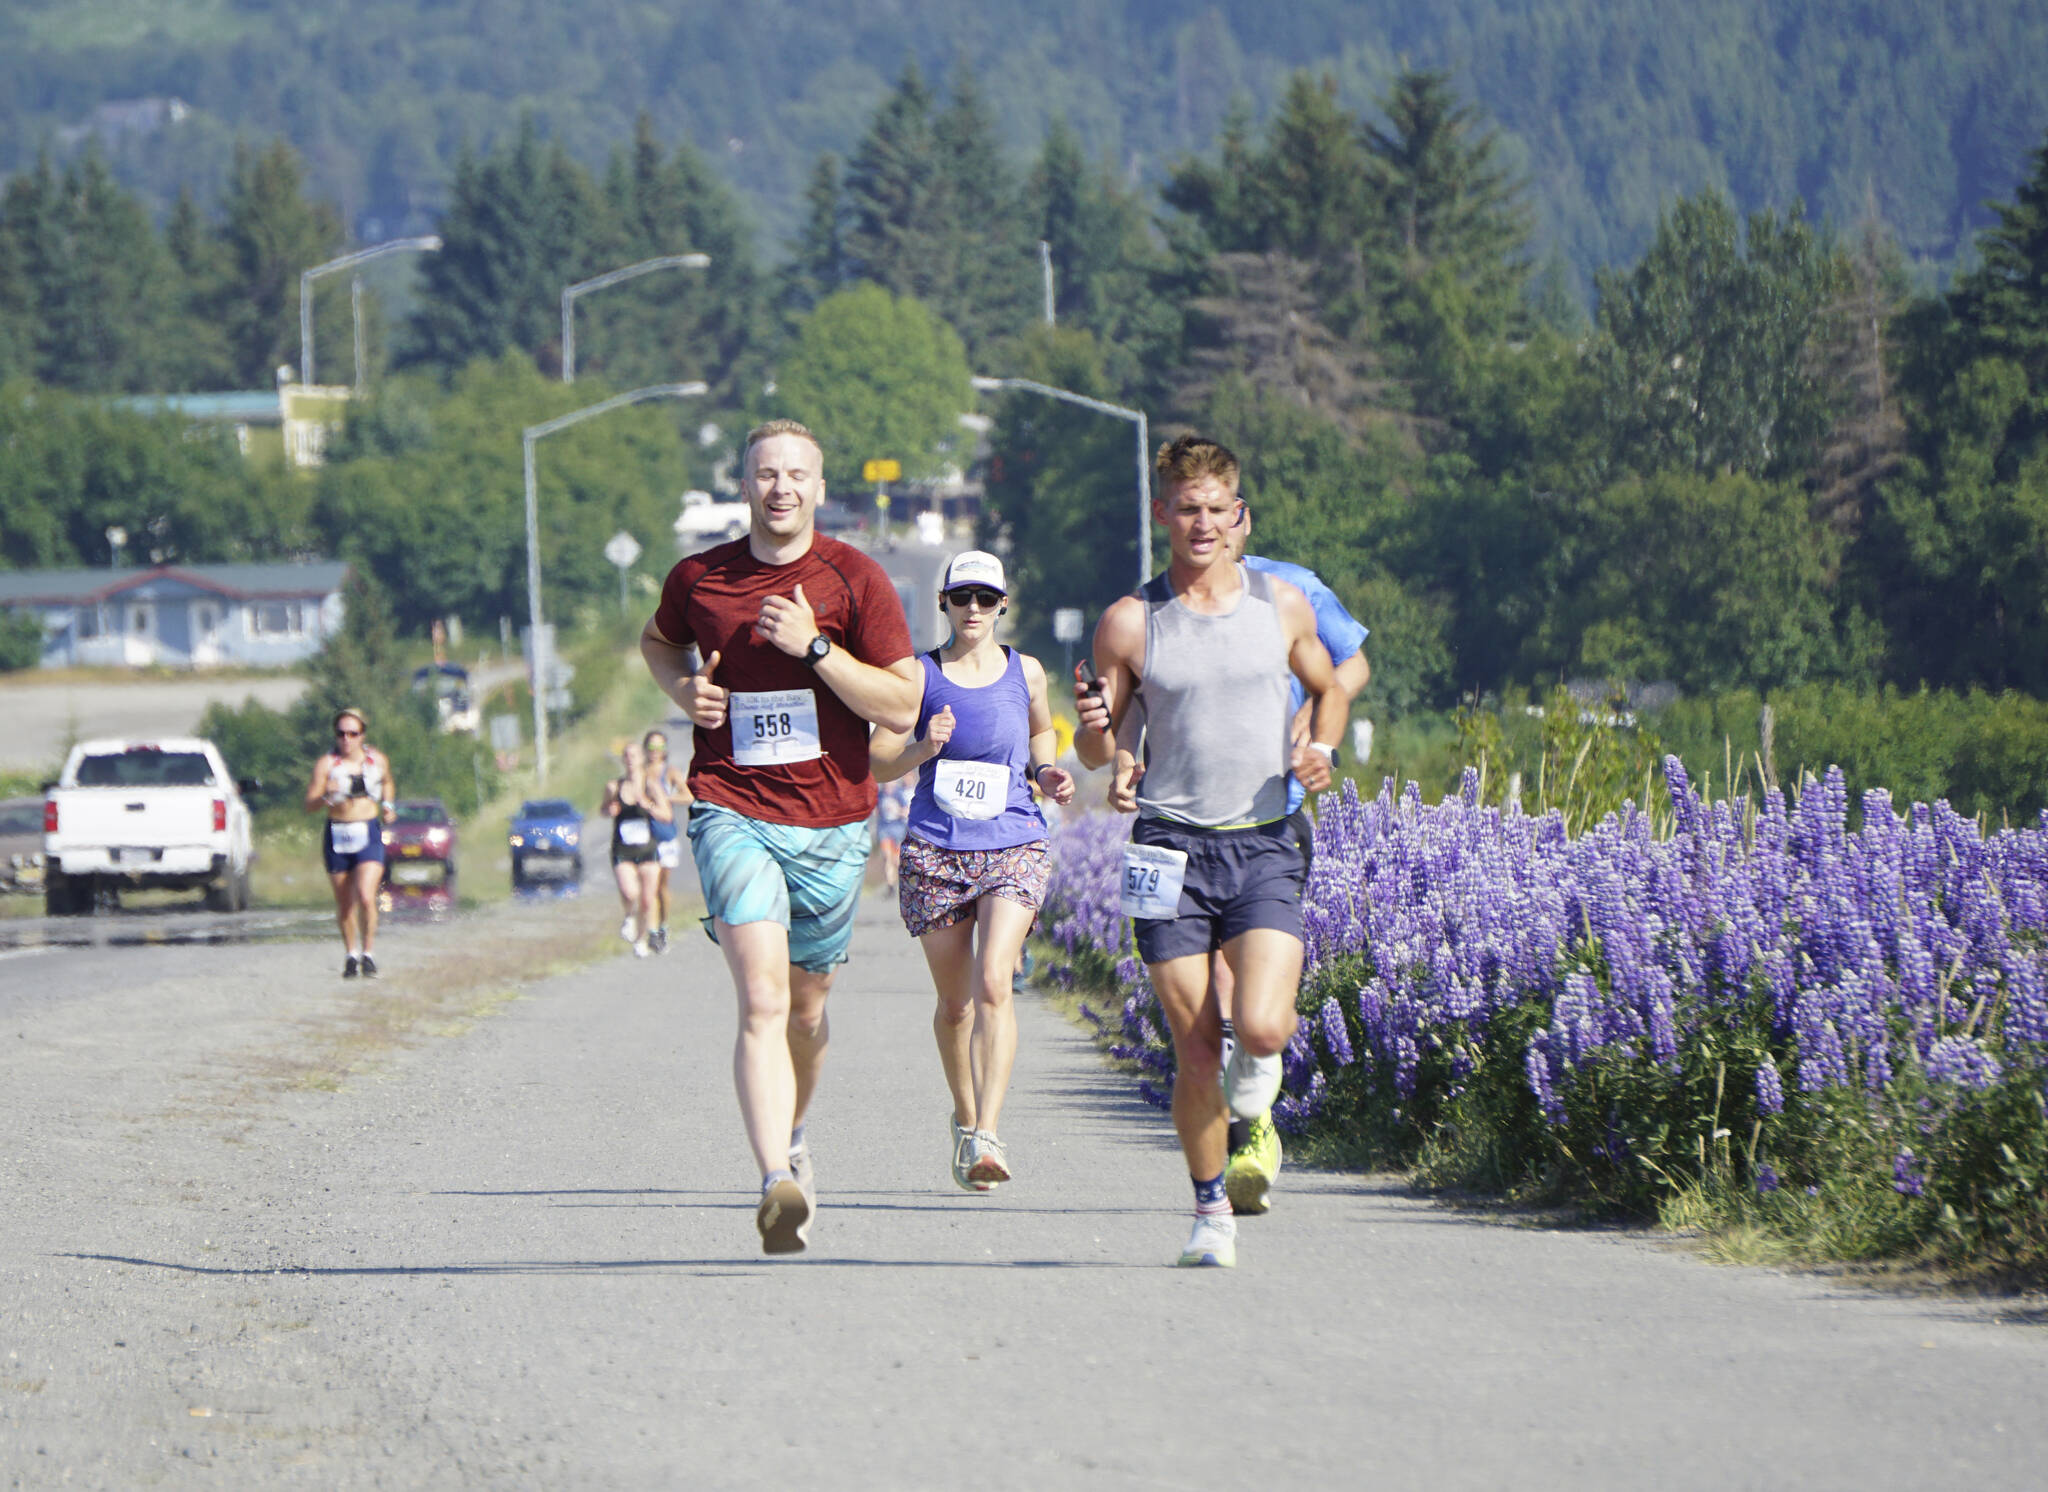 Silas Firth, left, Emily Knight, center, and Craig Albers, right, run past lupines in the 2022 Homer Spit Run 10k and Half Marathon on Saturday, June 25, 2022, in Homer, Alaska. (Photo by Michael Armstrong/Homer News)